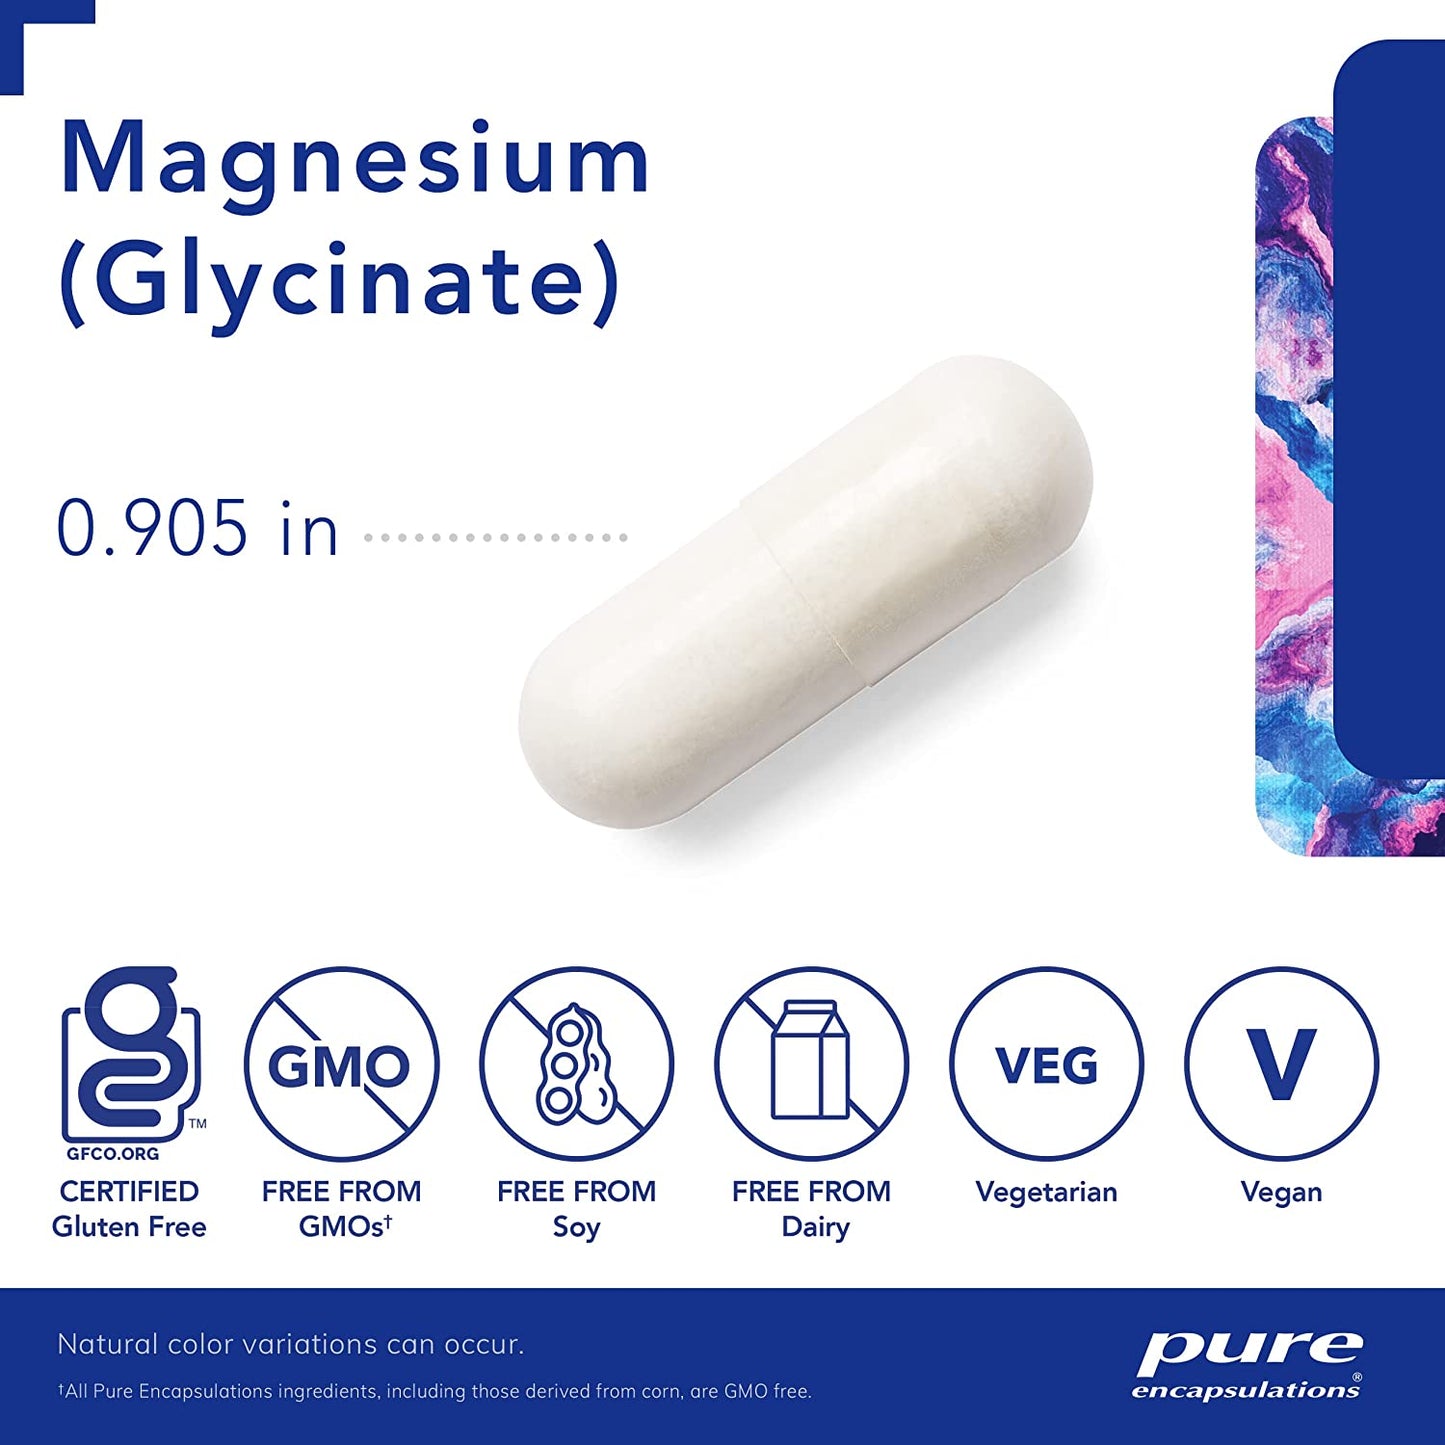 Magnesium (Glycinate) - Supplement to Support Stress Relief, Sleep, Heart Health, Nerves, Muscles, and Metabolism* - with Magnesium Glycinate - 90 Capsules